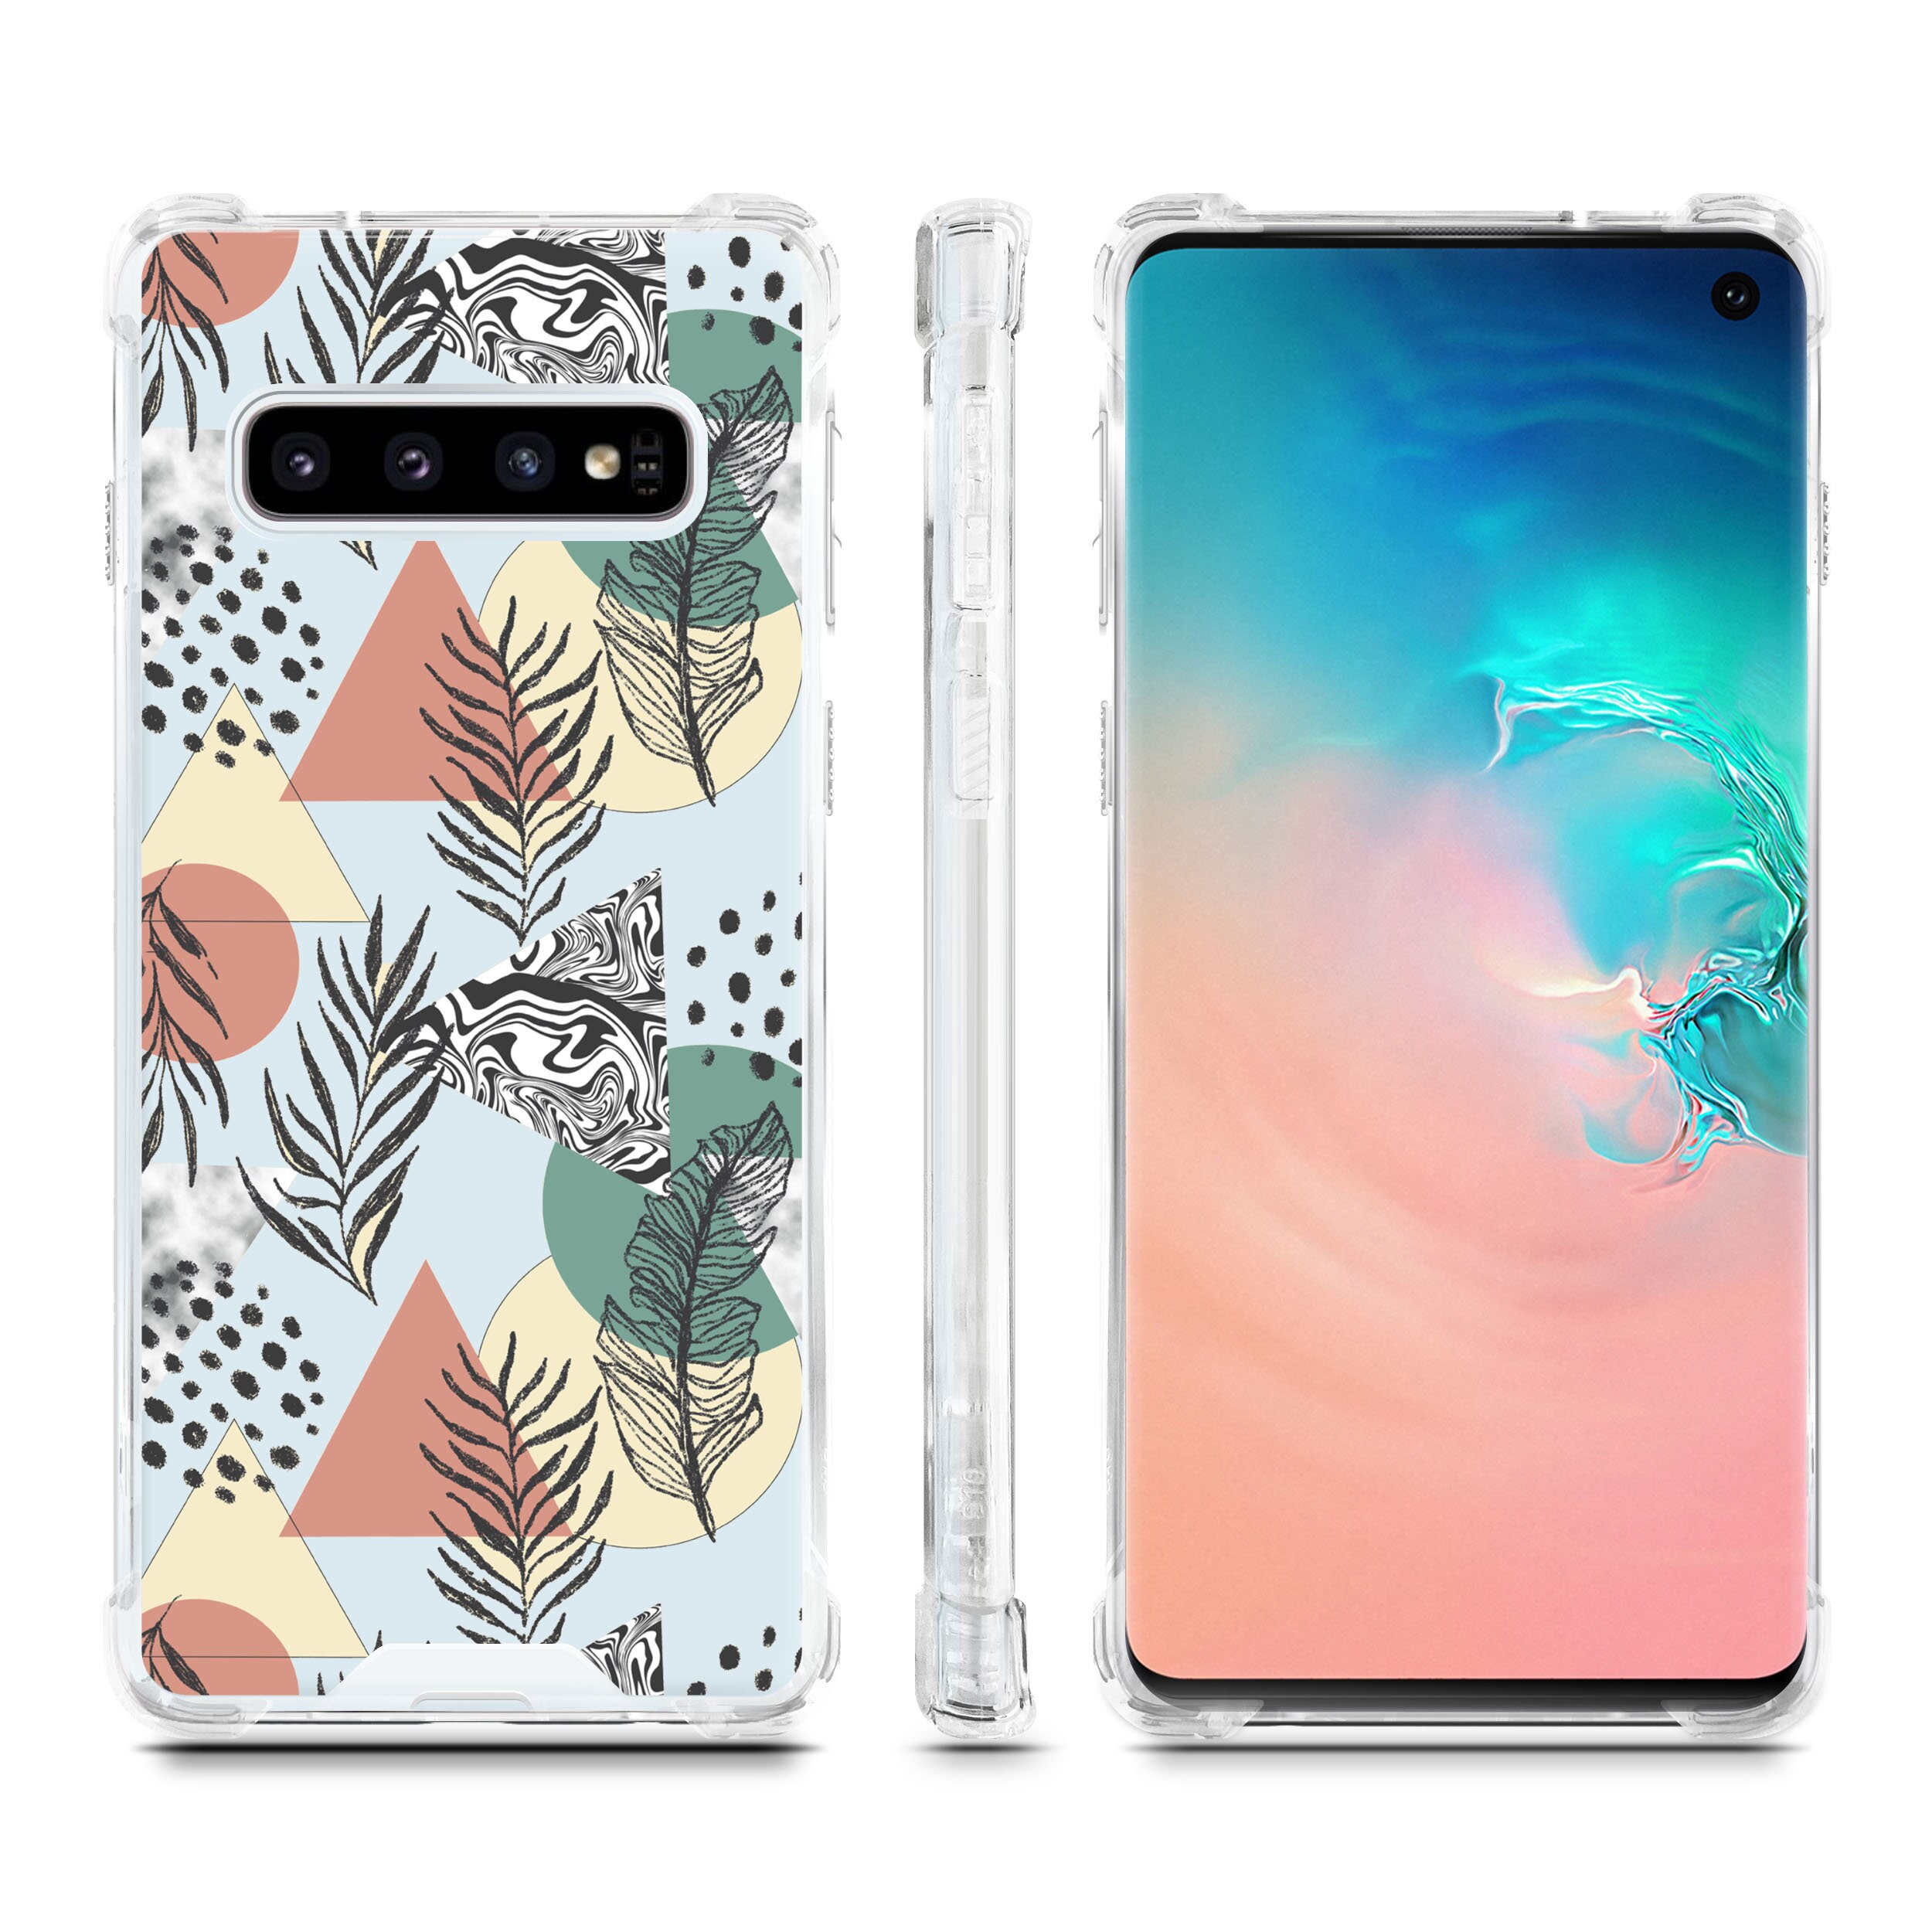 Aesthetic Case For Samsung S21 Ultra Case Galaxy S10 Case Tropical Palms Galaxy S20 Case For Galaxy A32 Case For Samsung S21 Plus Case MB90B